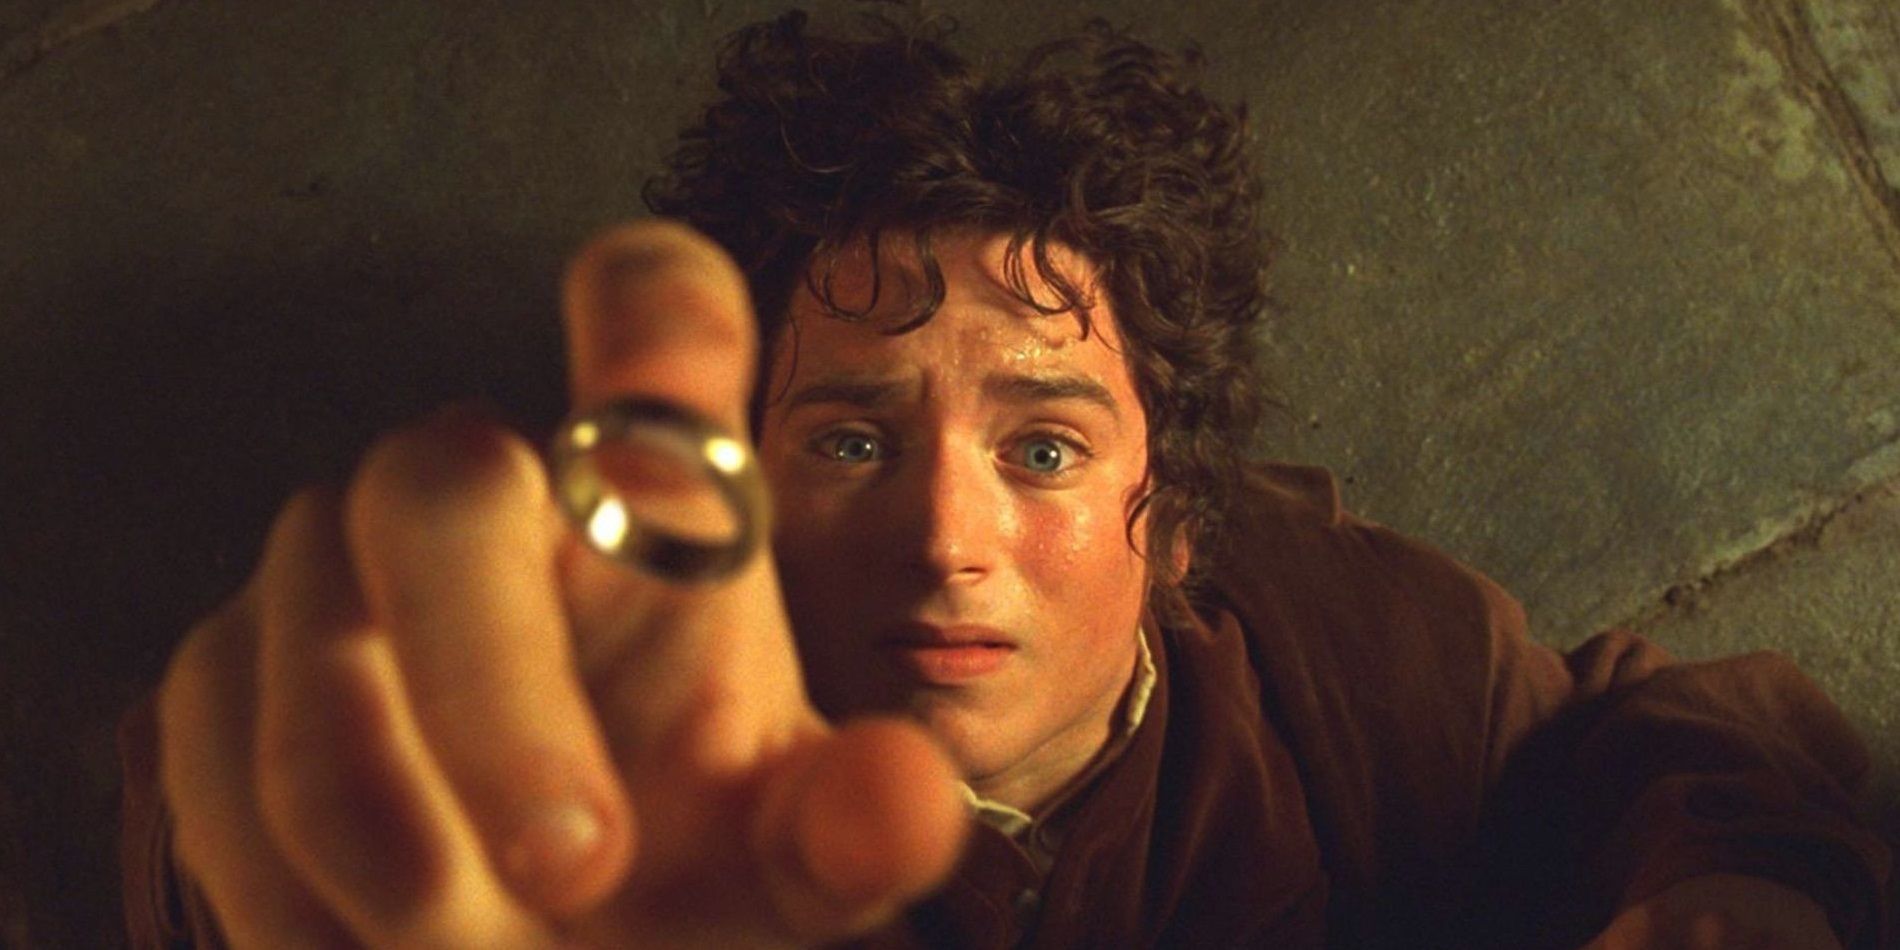 Elijah Wood catches the One Ring in The Lord of the Rings